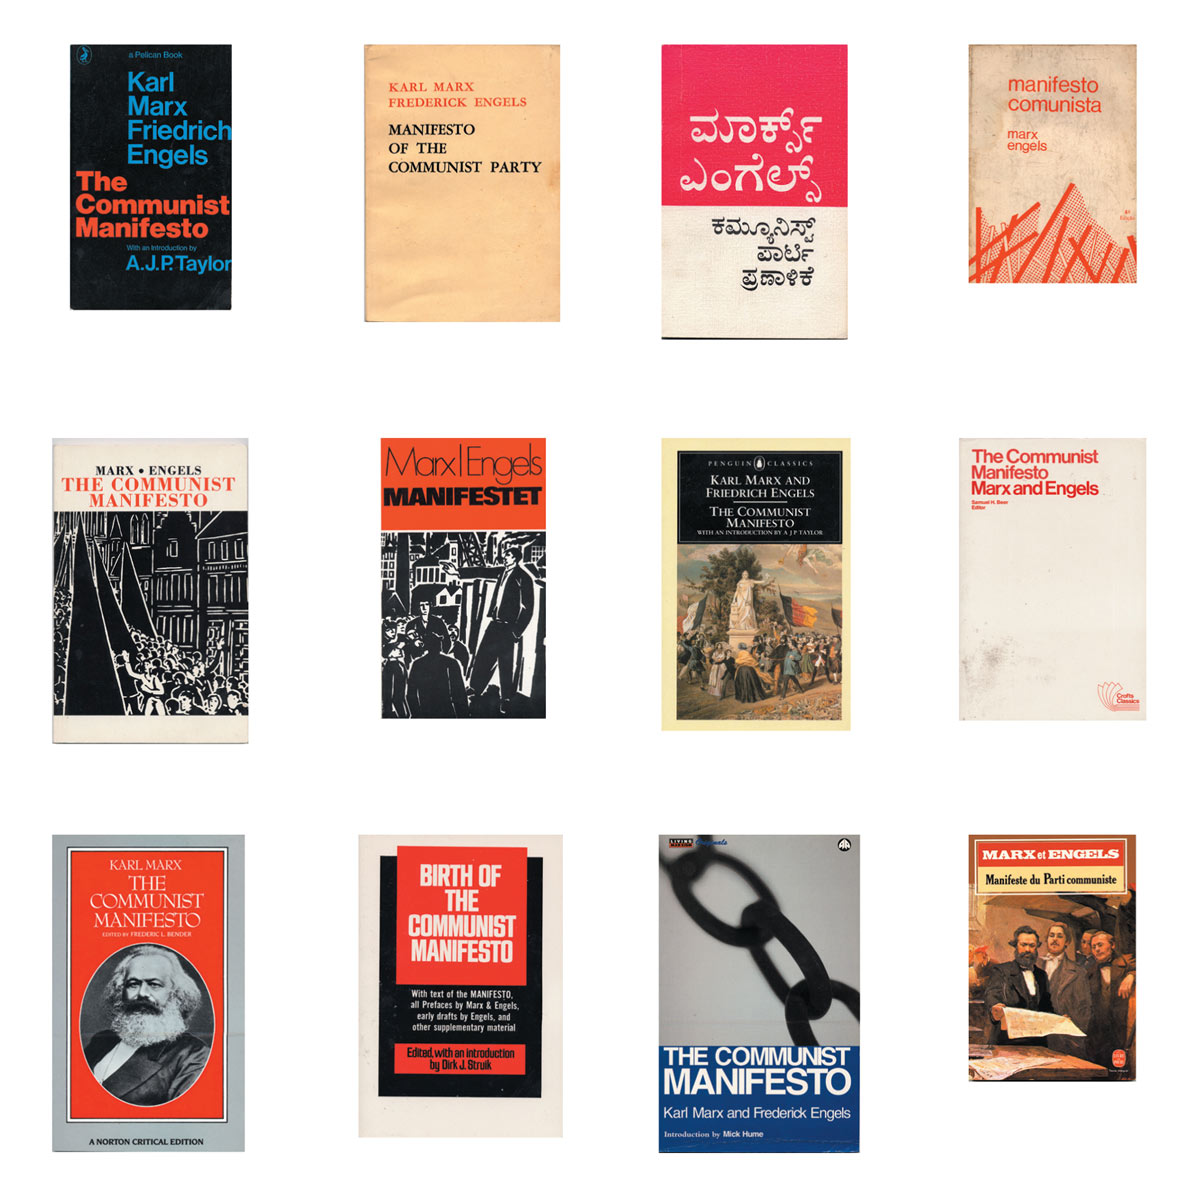 Year of publication (from top, left to right): 1974, 1977, 1978, 1982, 1983, 1984, 1985, 1987, 1988, 1993, 1996, 1997. (For full citations, see footnote 1.)